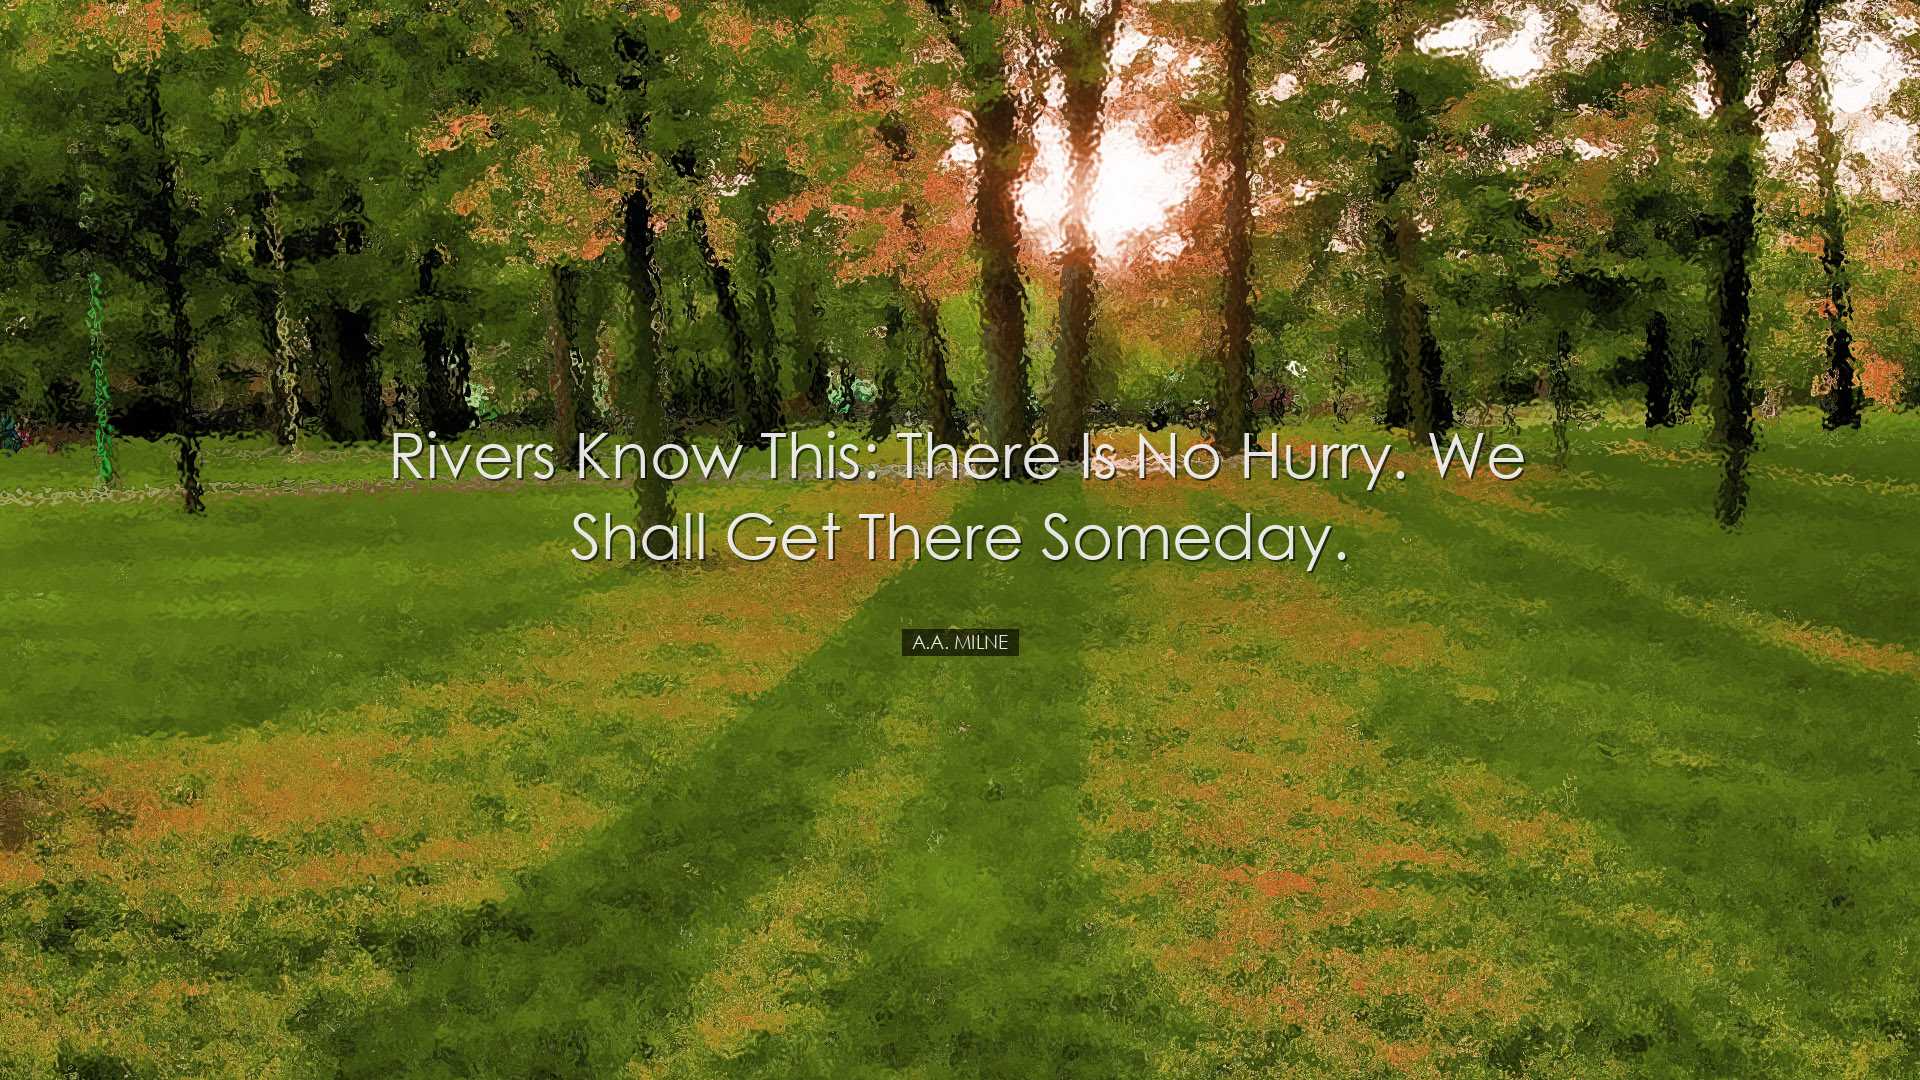 Rivers know this: there is no hurry. We shall get there someday. -